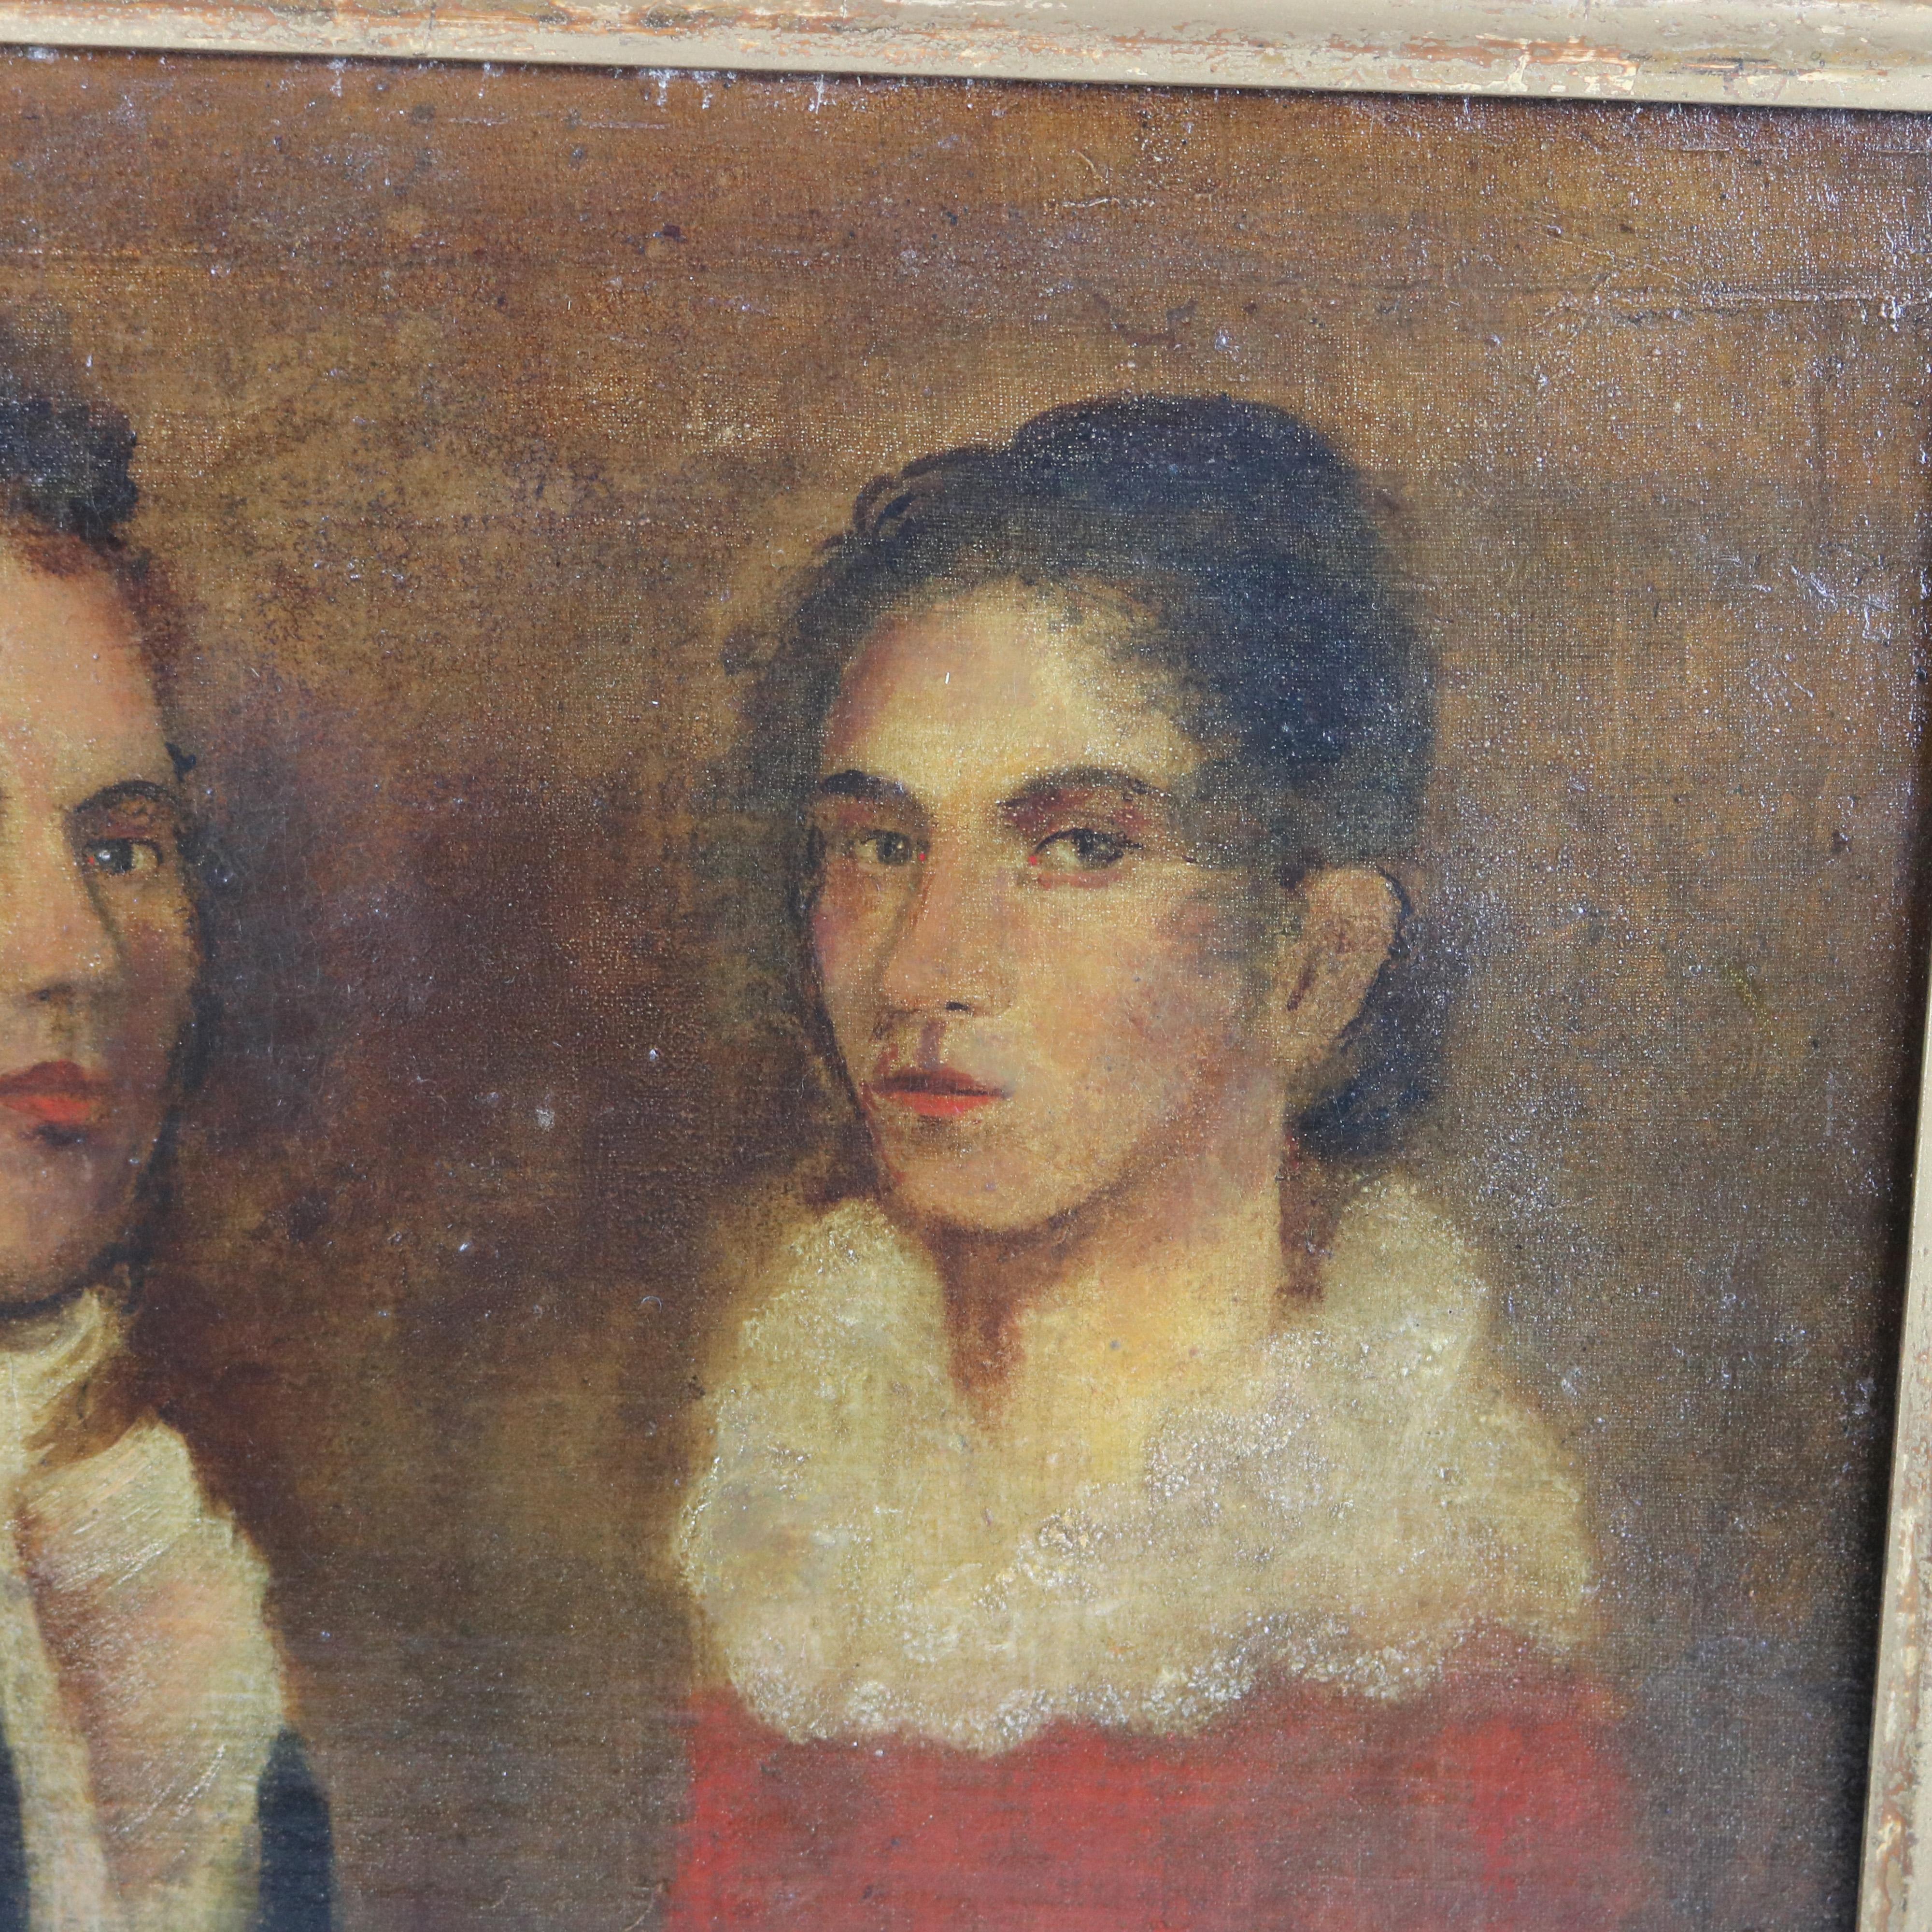 American Antique Painting Portrait of a Lady & Gentleman Couple by Joshua Johnson, c1840